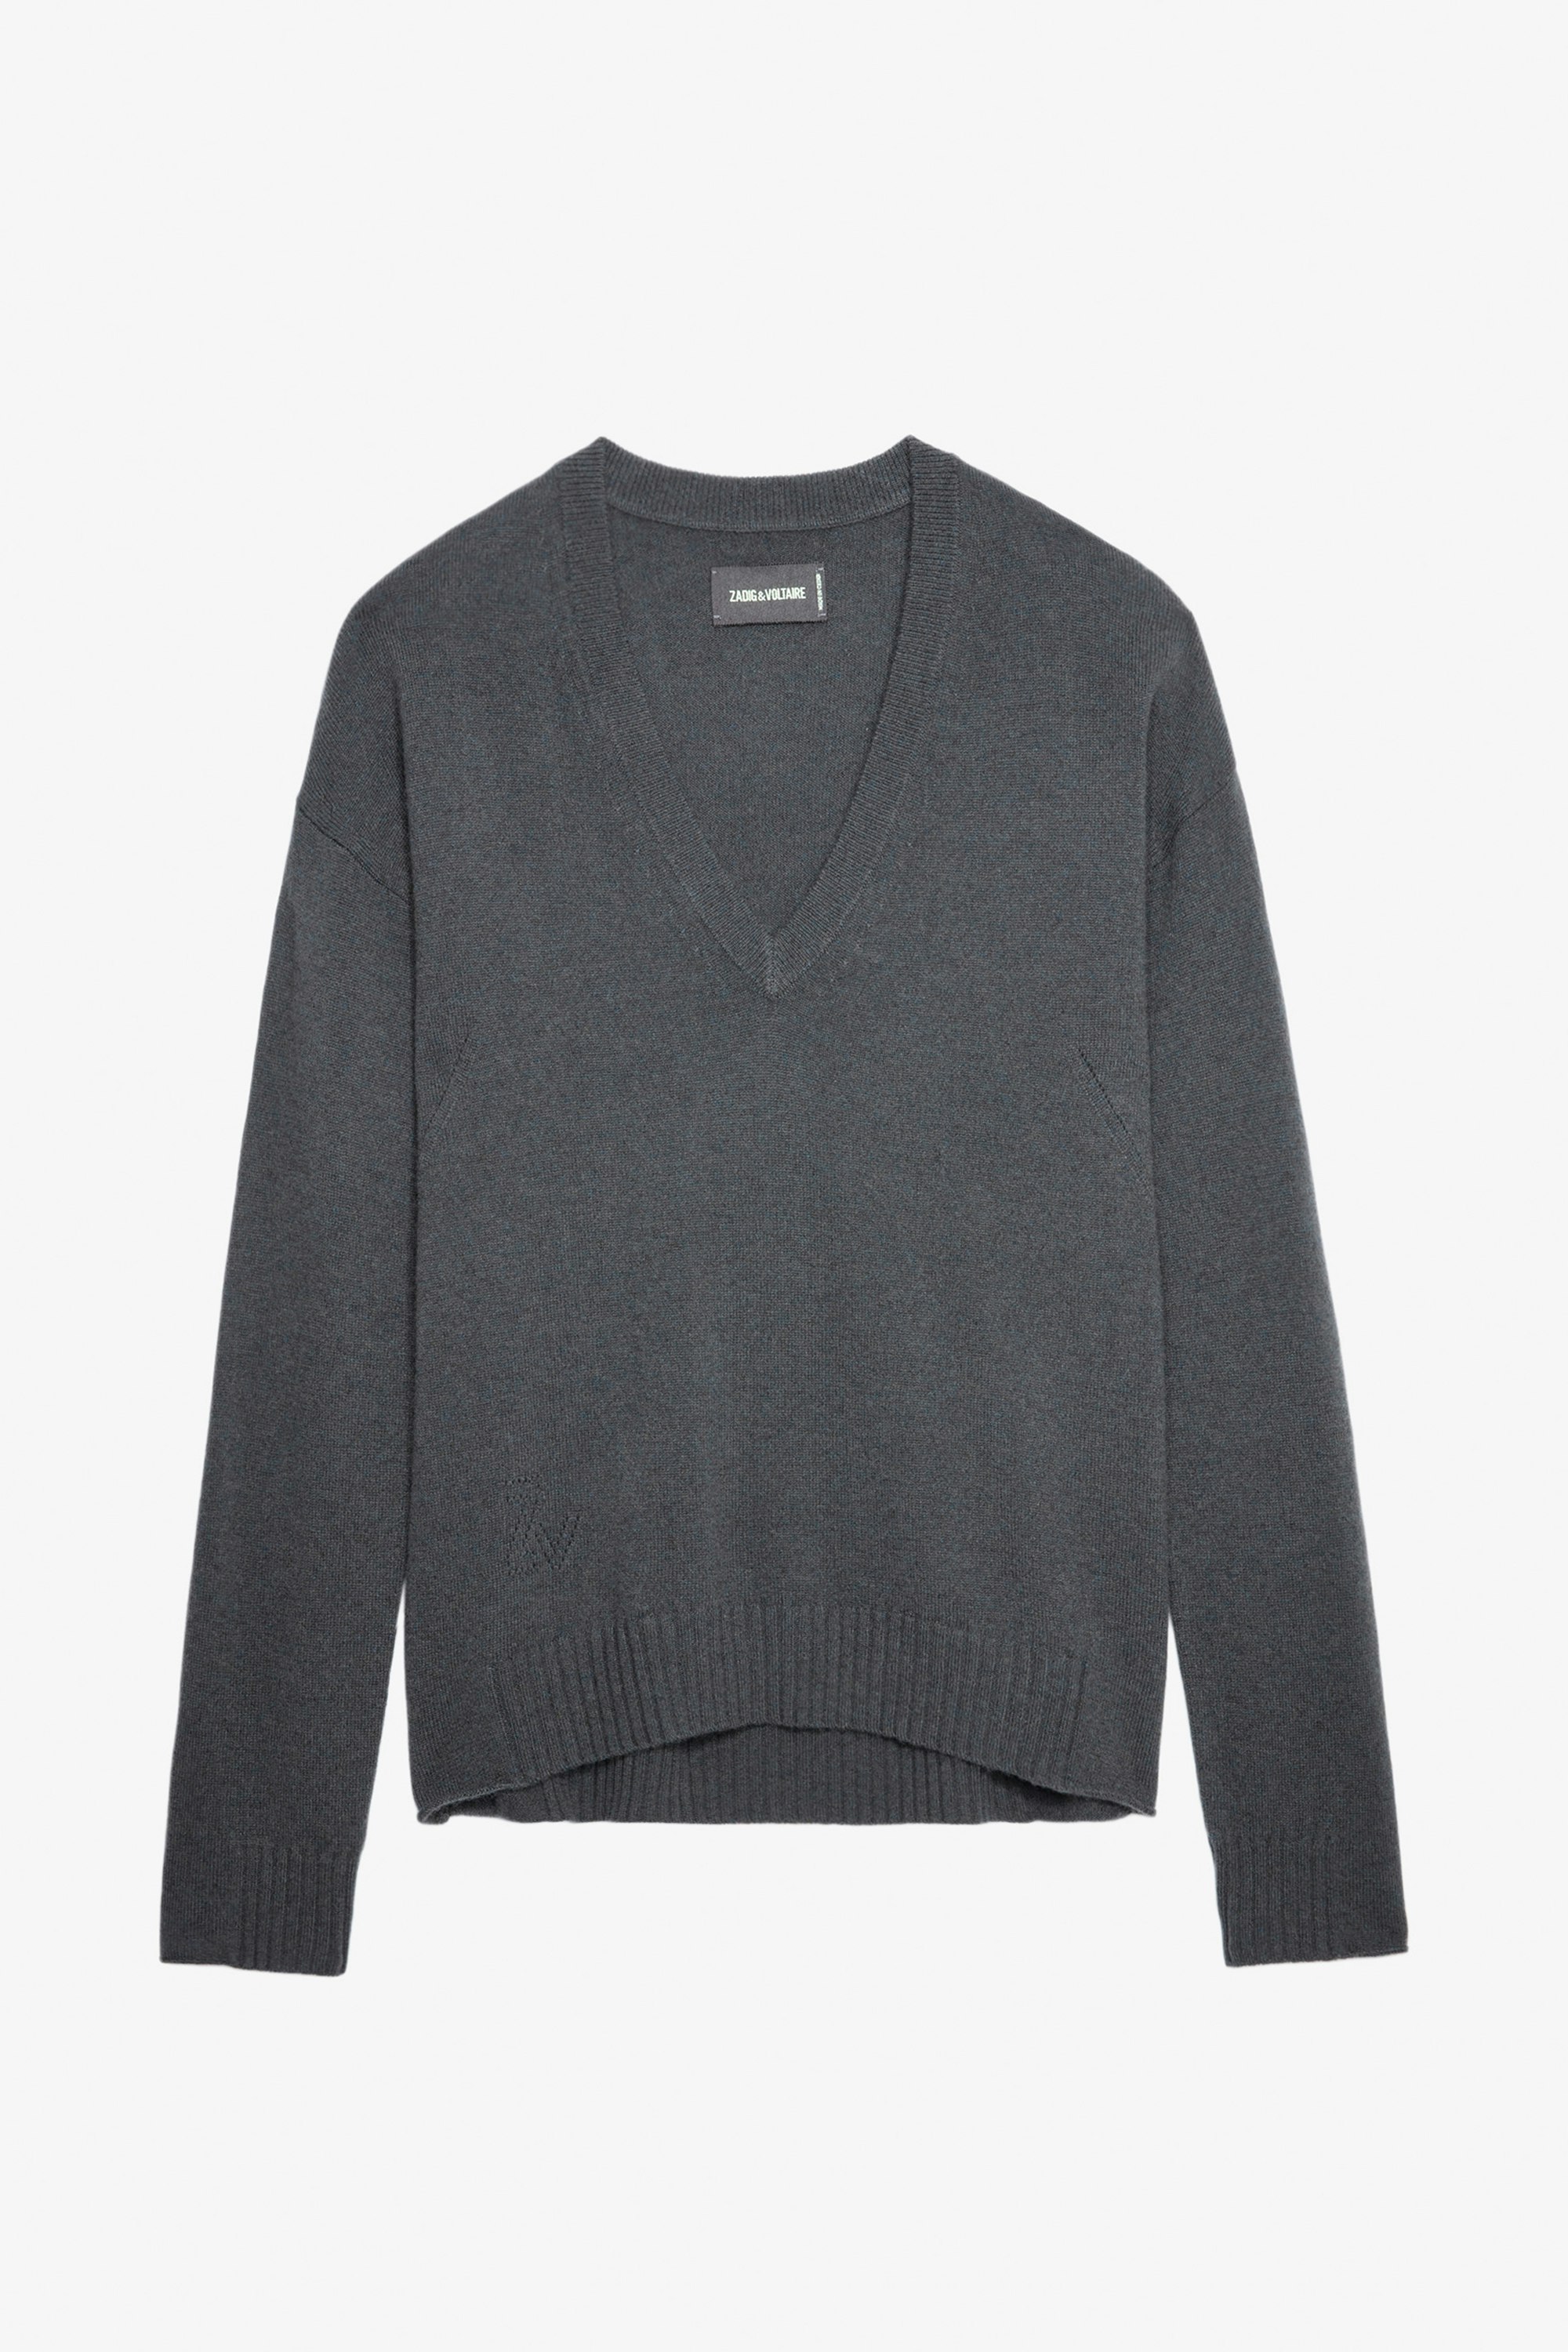 Vivi パッチカシミヤニット - Women’s grey cashmere jumper with star patches on the elbows.